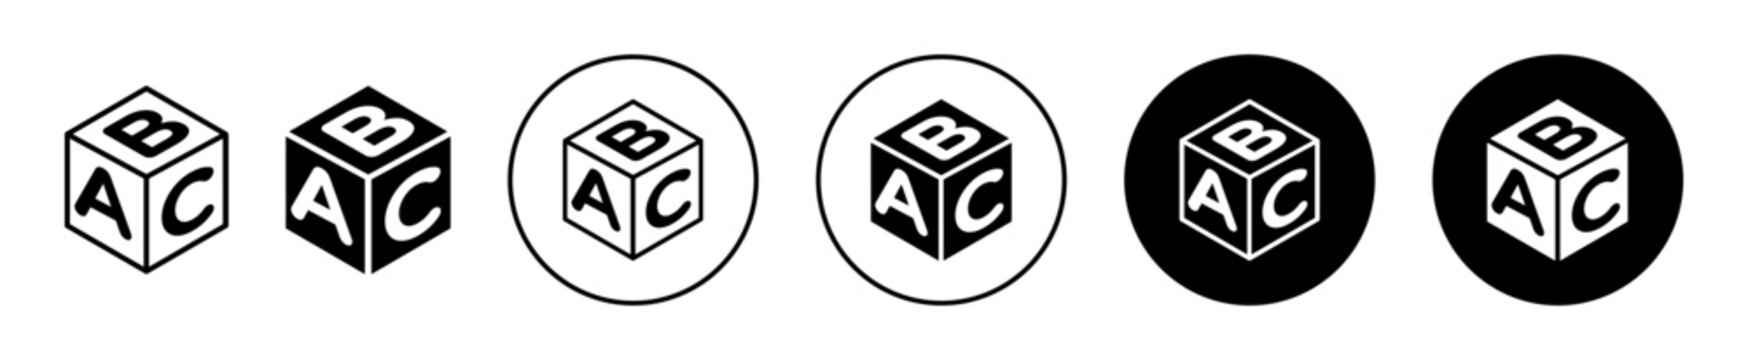 ABC blocks icon set. learn abc alphabet cube vector symbol. baby education blocks sign in black filled and outlined style.